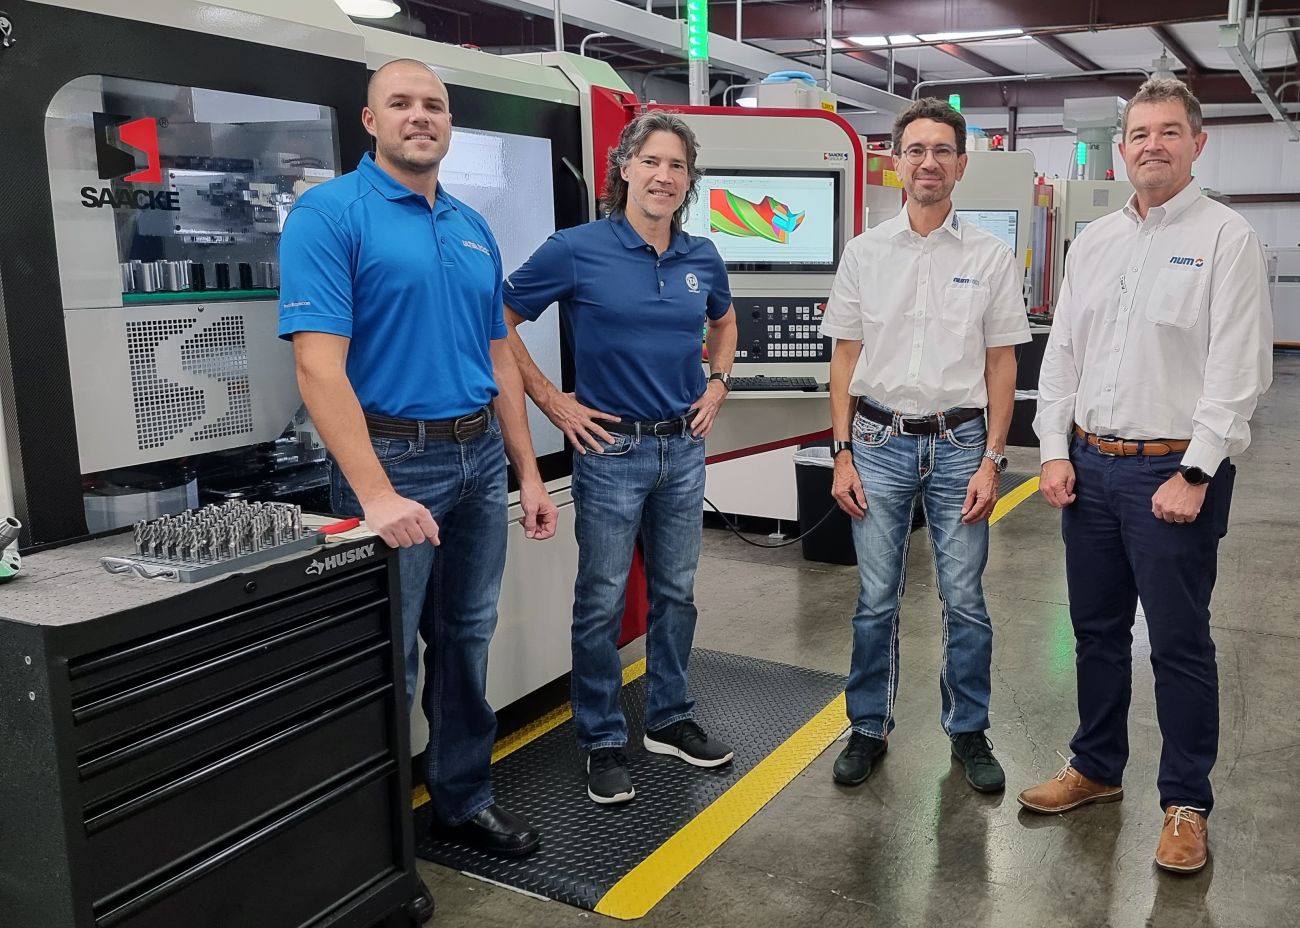 L-R: Mark Wortsman, Technical Director, Tool Alliance; Dave Povich, owner & President, Tool Alliance; Patrick Schmid, NUMROTO Project Manager and Steven Schilling, General Manager, NUM Corporation.